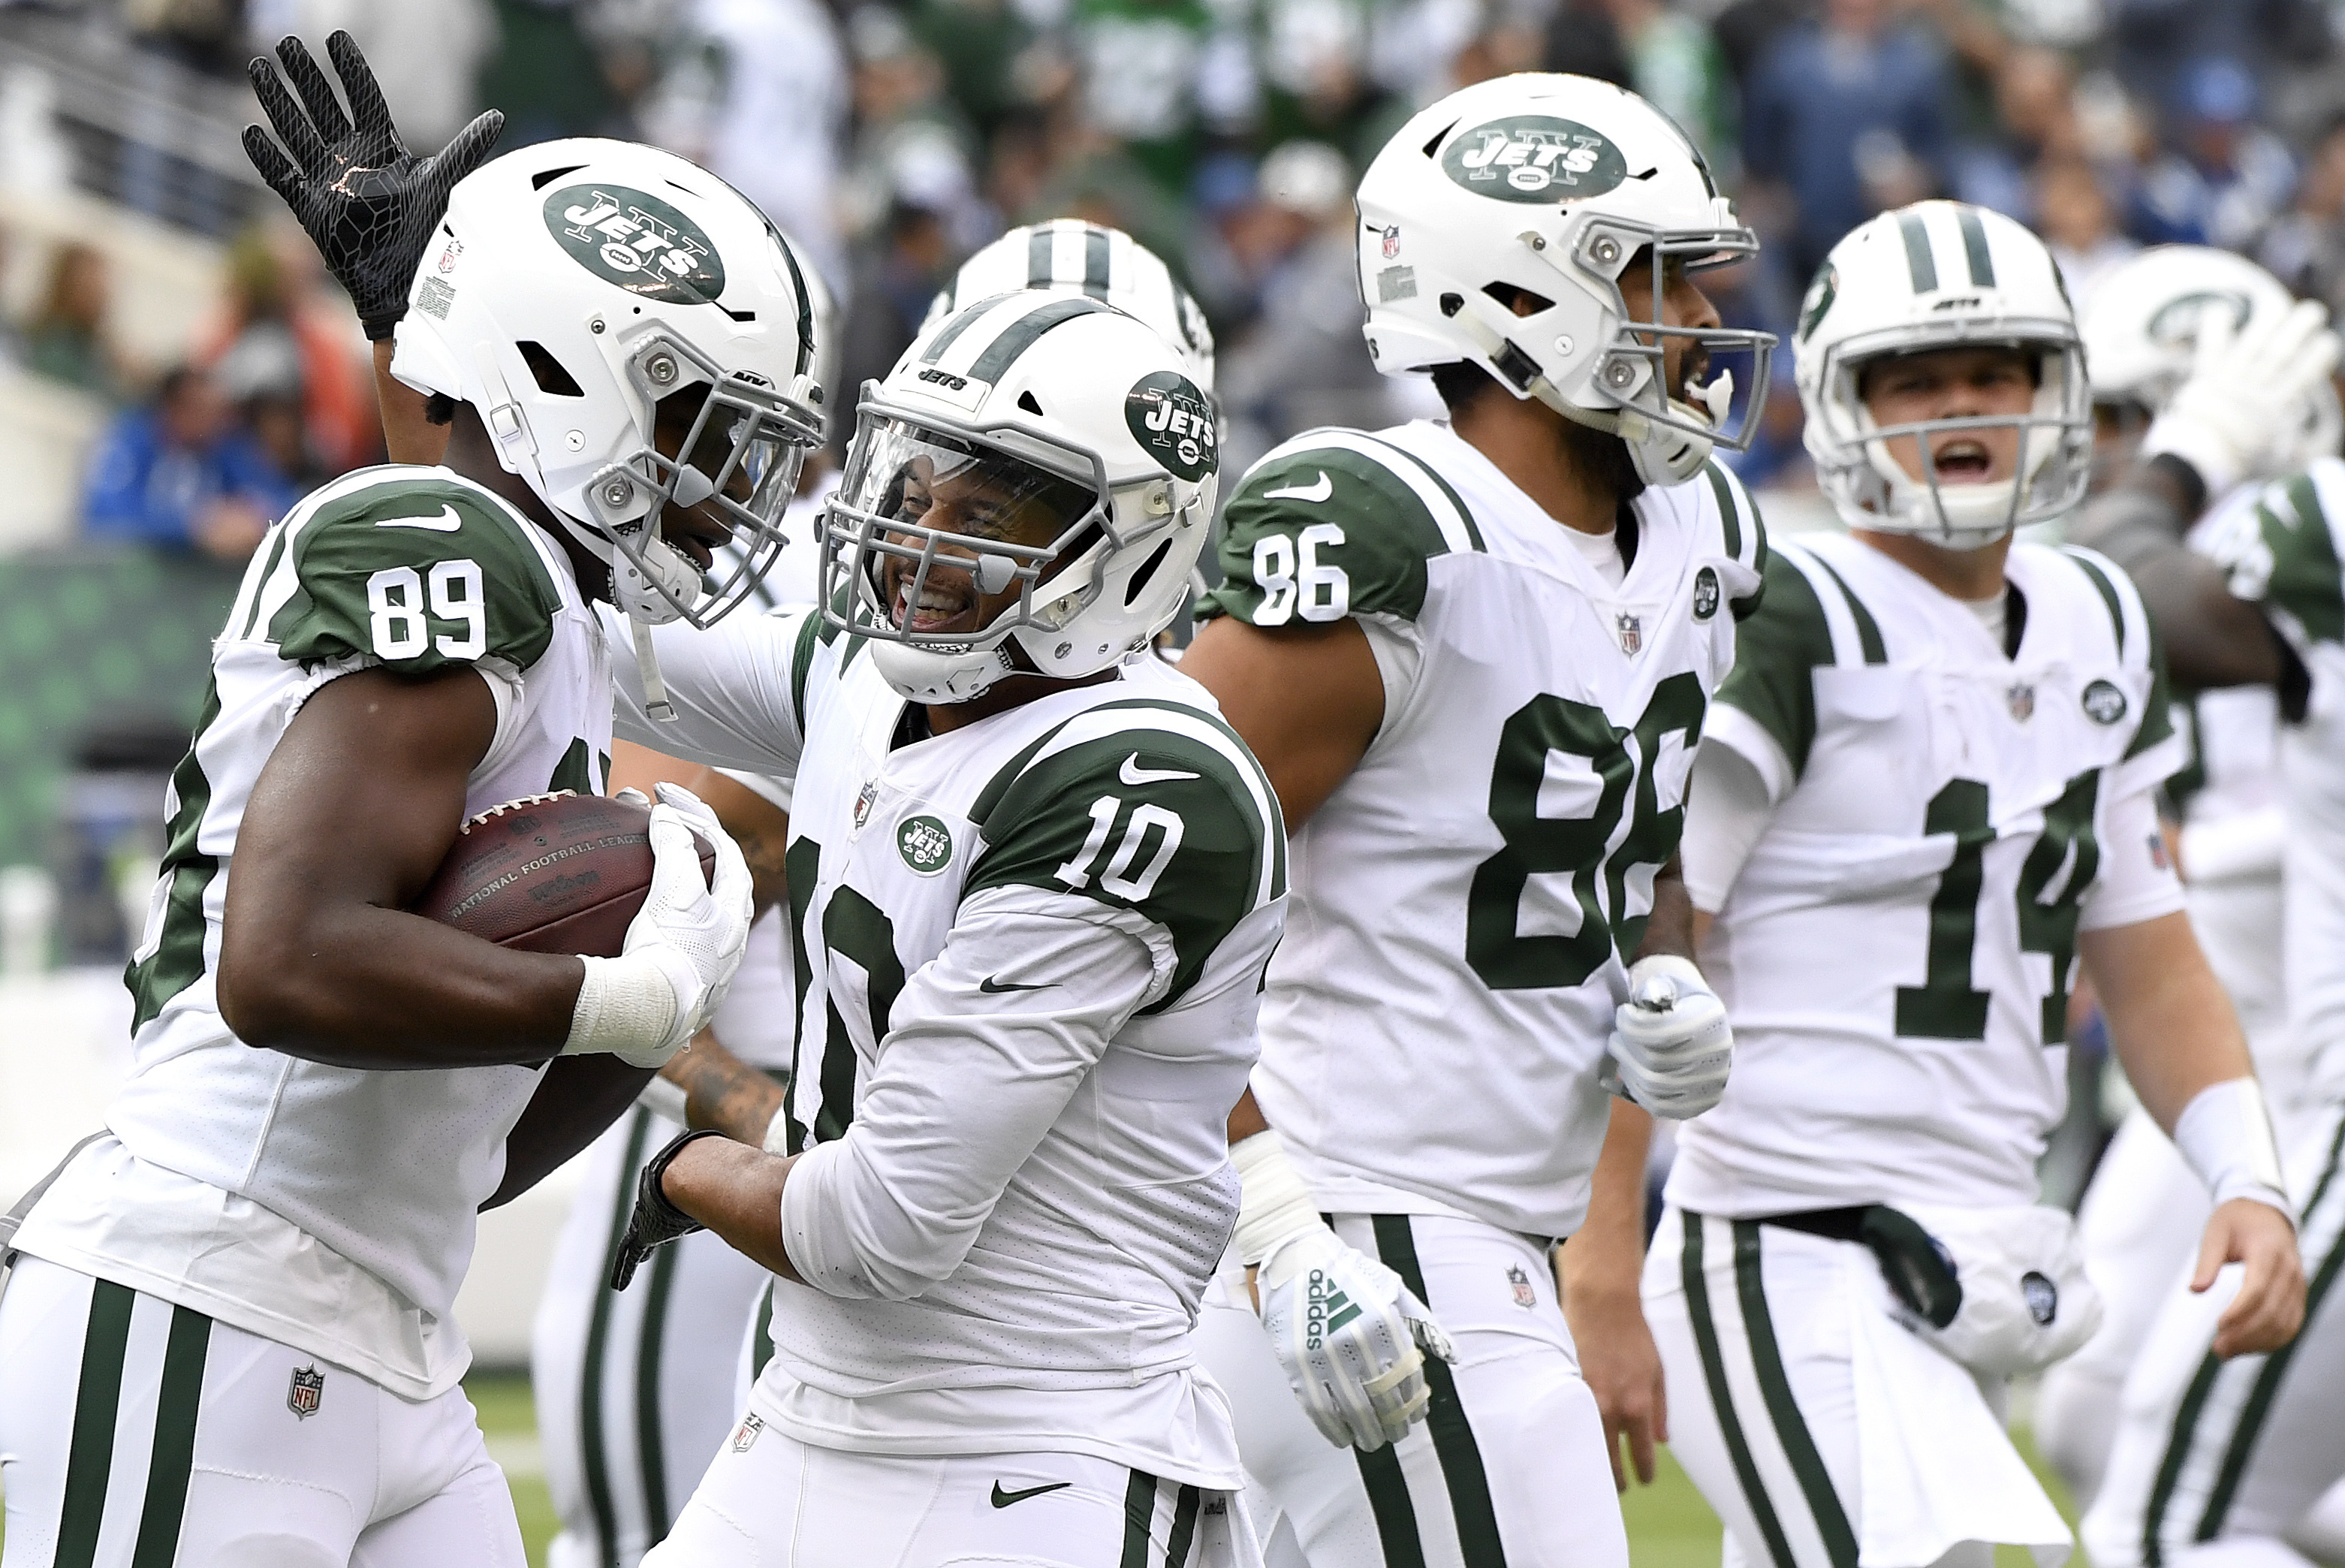 Jets get 'bittersweet' victory over Colts, look to improve